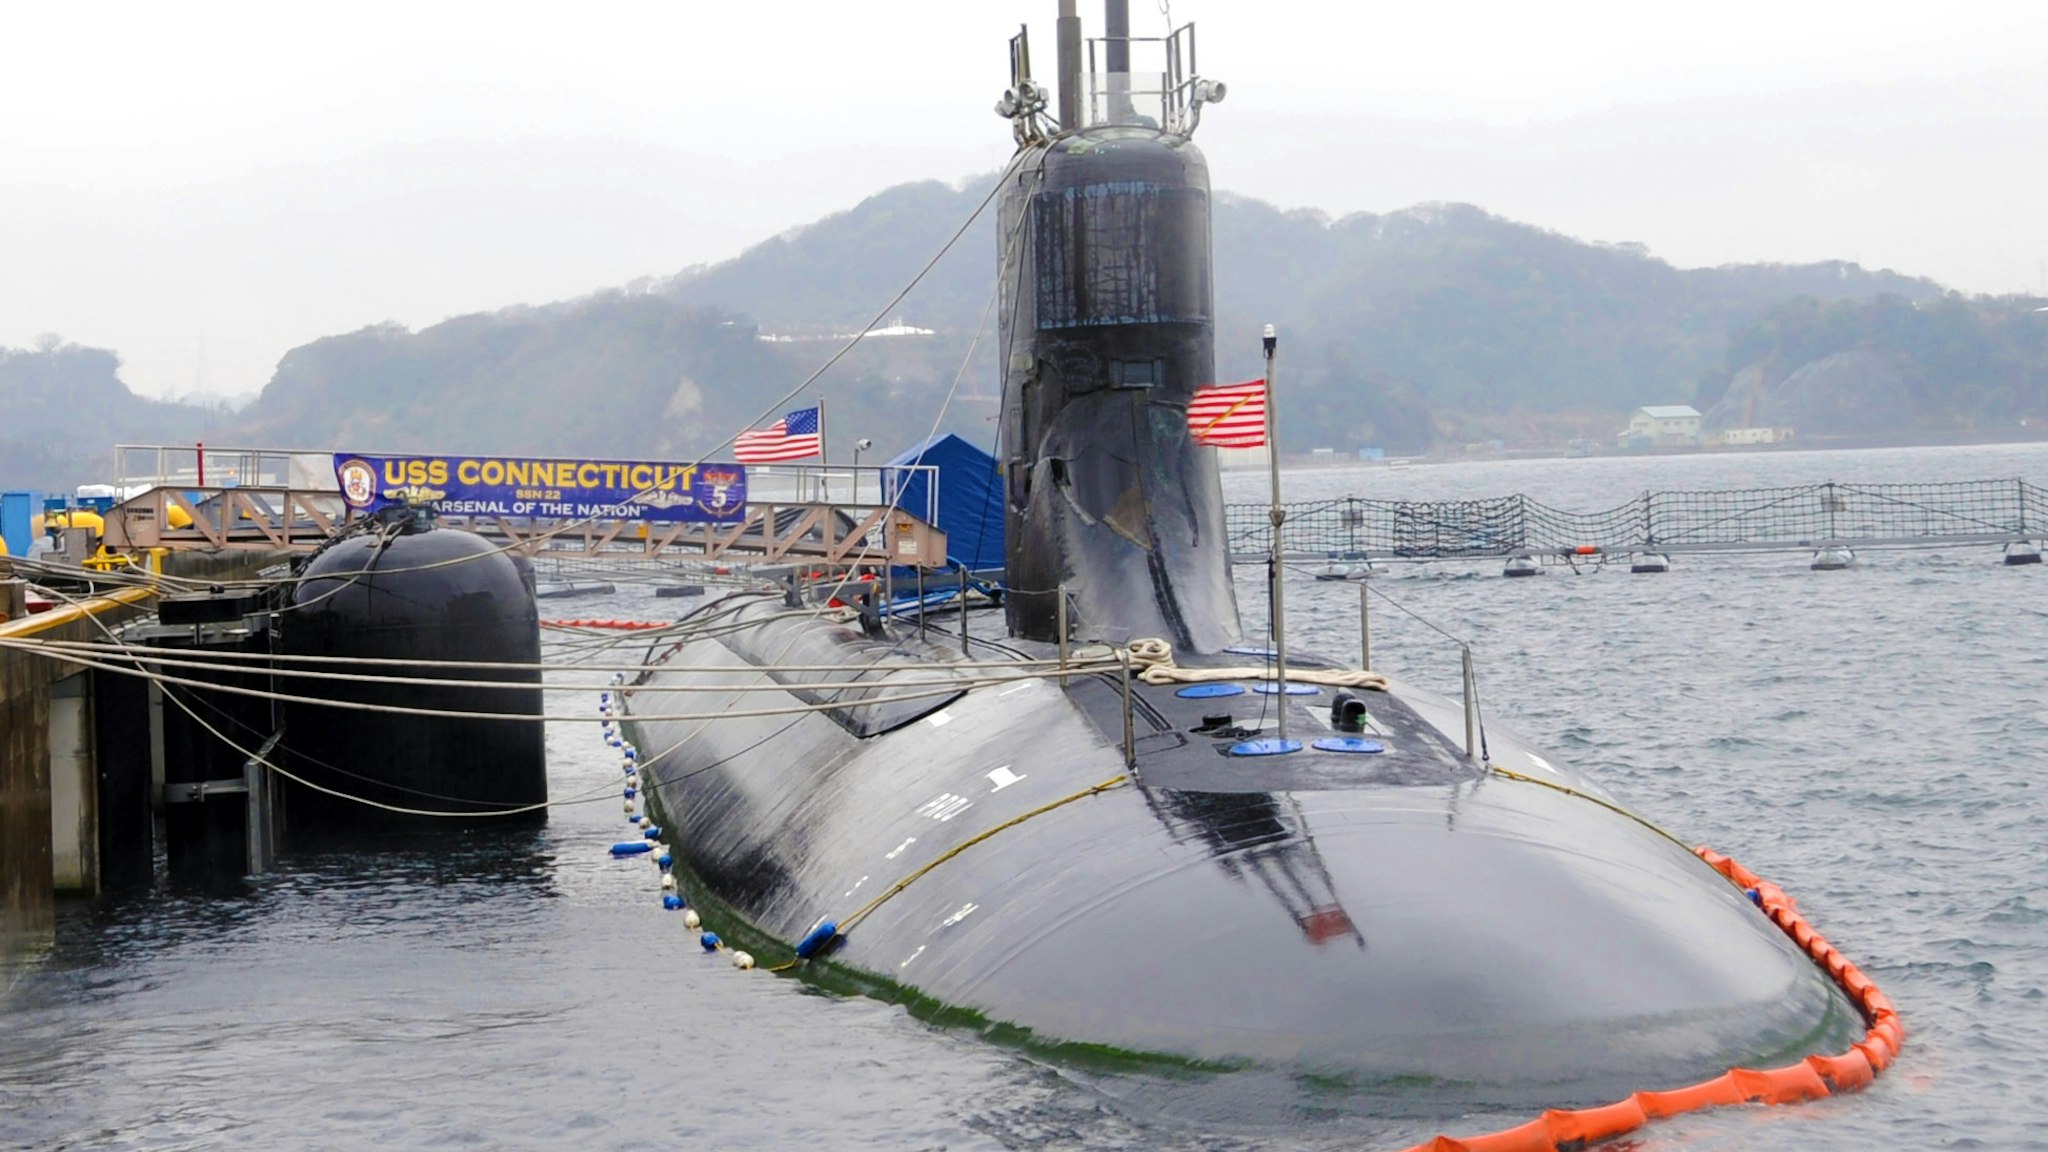 YOKOSUKA, Japan (March 9, 2012) - The Seawolf-class attack submarine USS Connecticut (SSN 22) arrives at Fleet Activities Yokosuka during its deployment to the Western Pacific region.